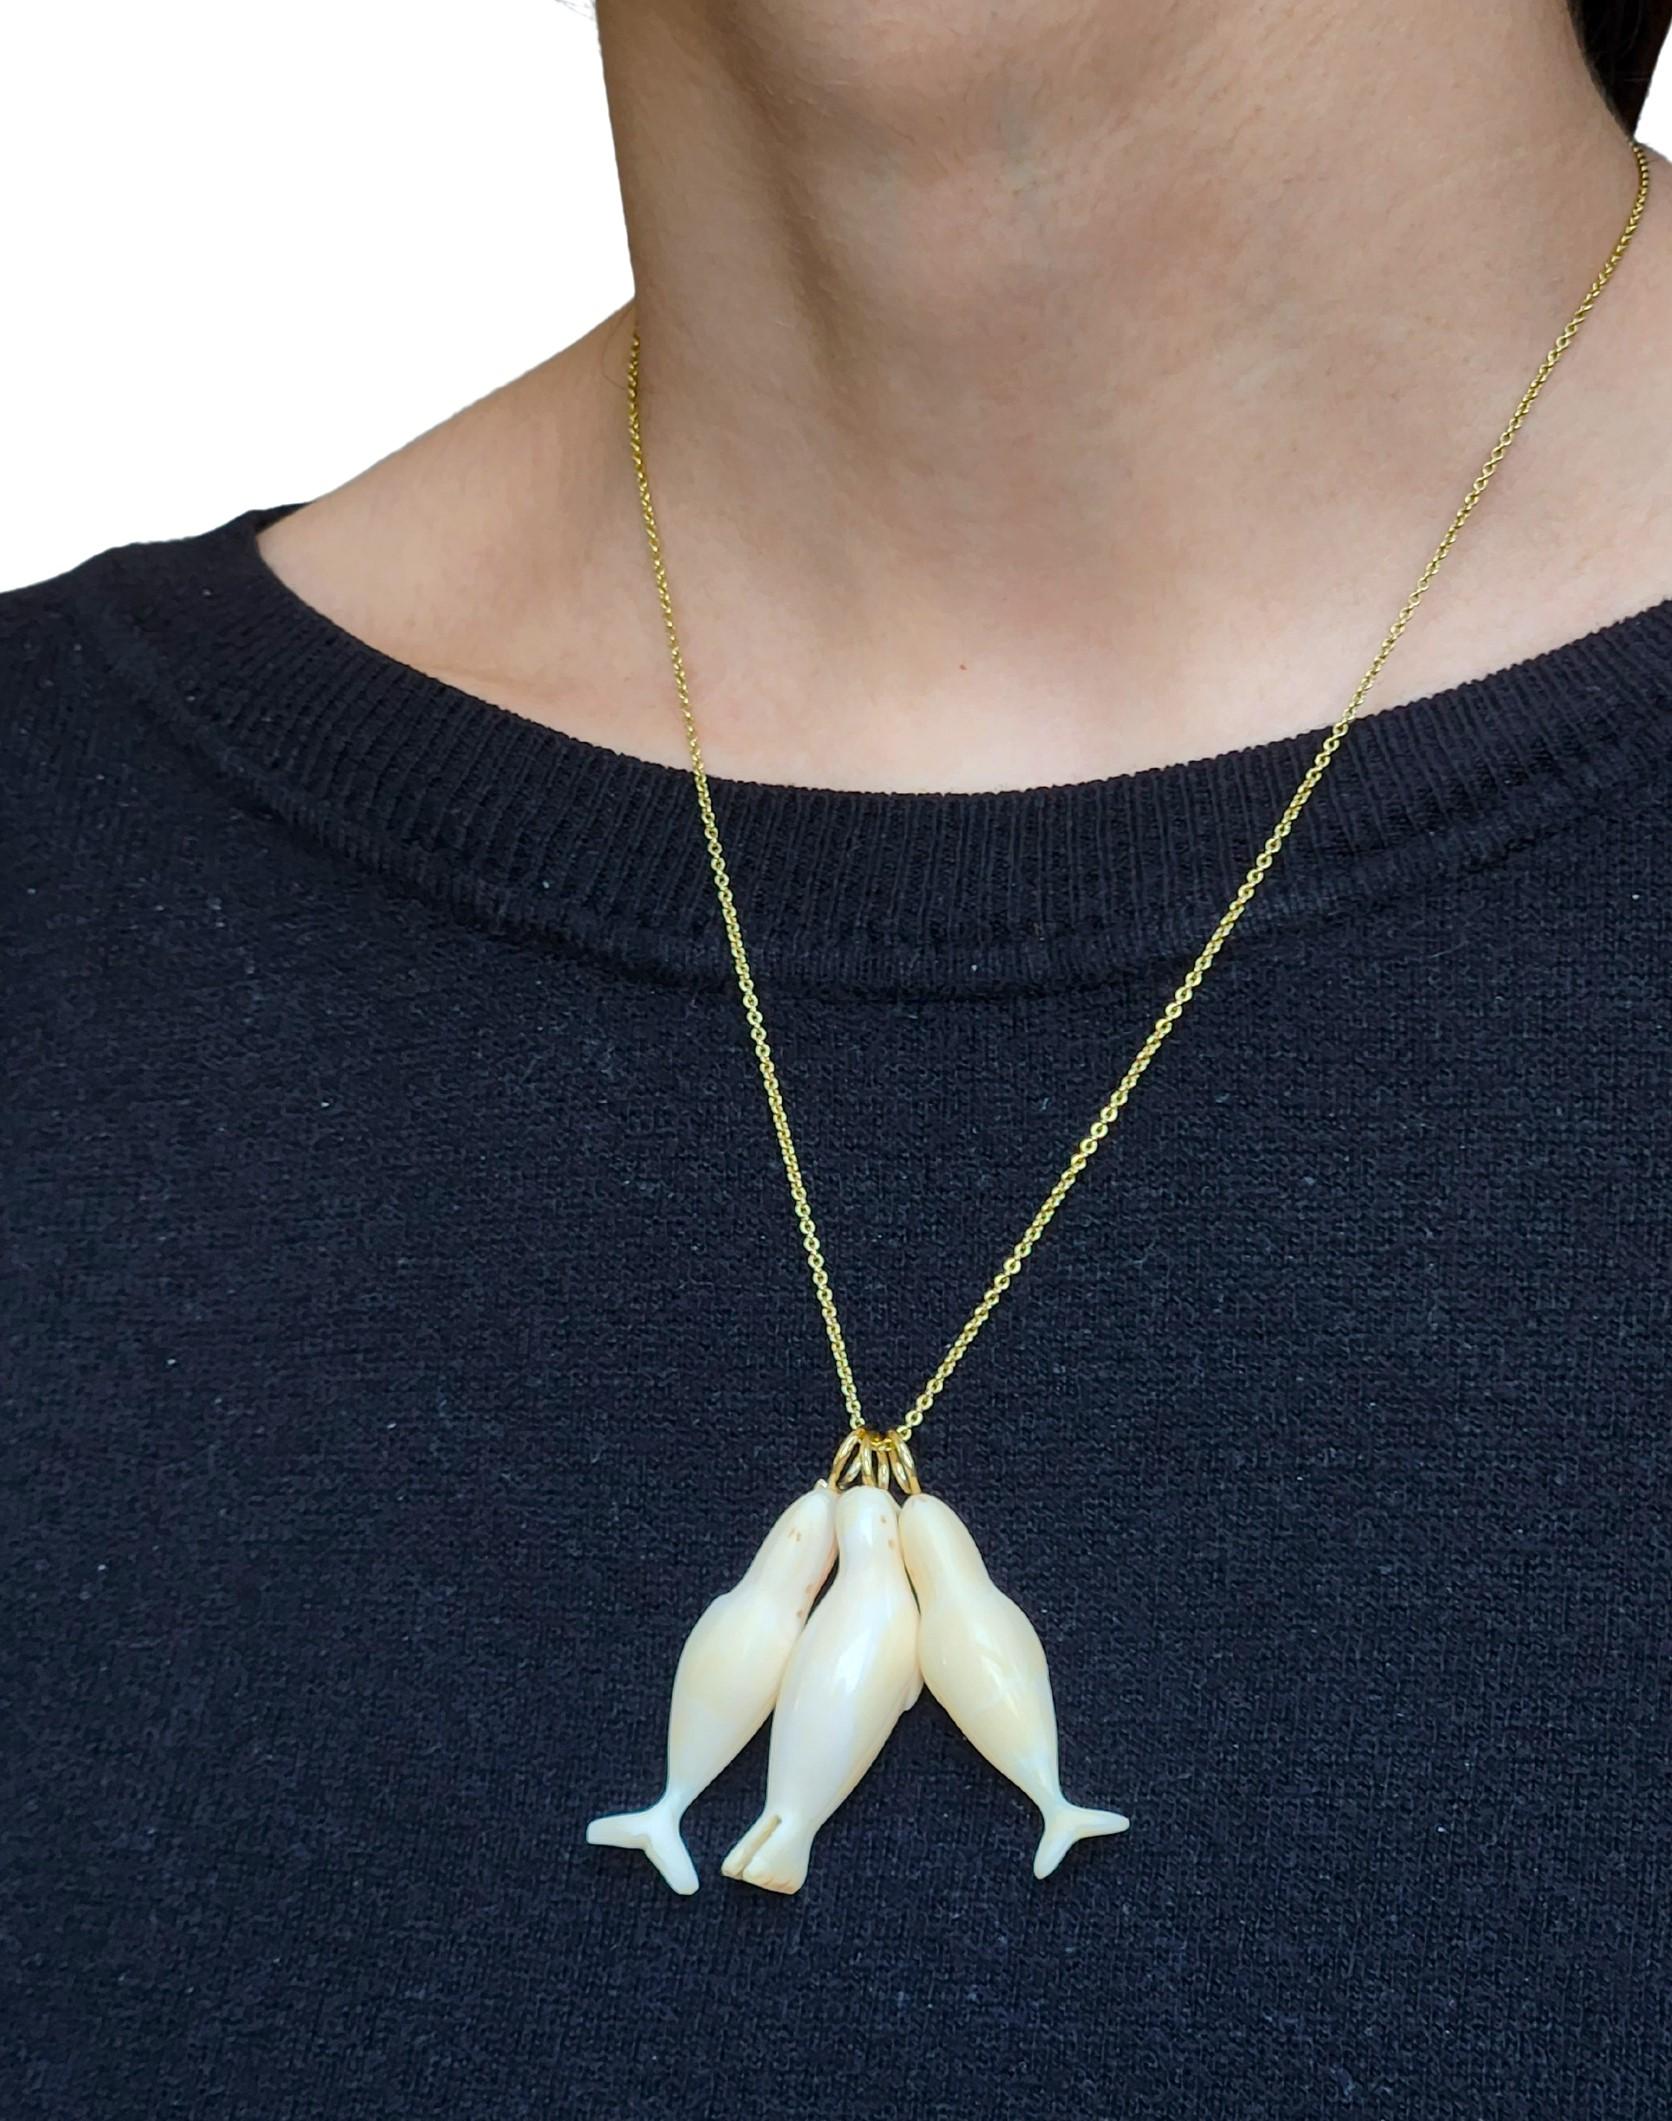 Women's or Men's Ancient Ice Inuit Hand Carved Walrus Necklace in 18K For Sale